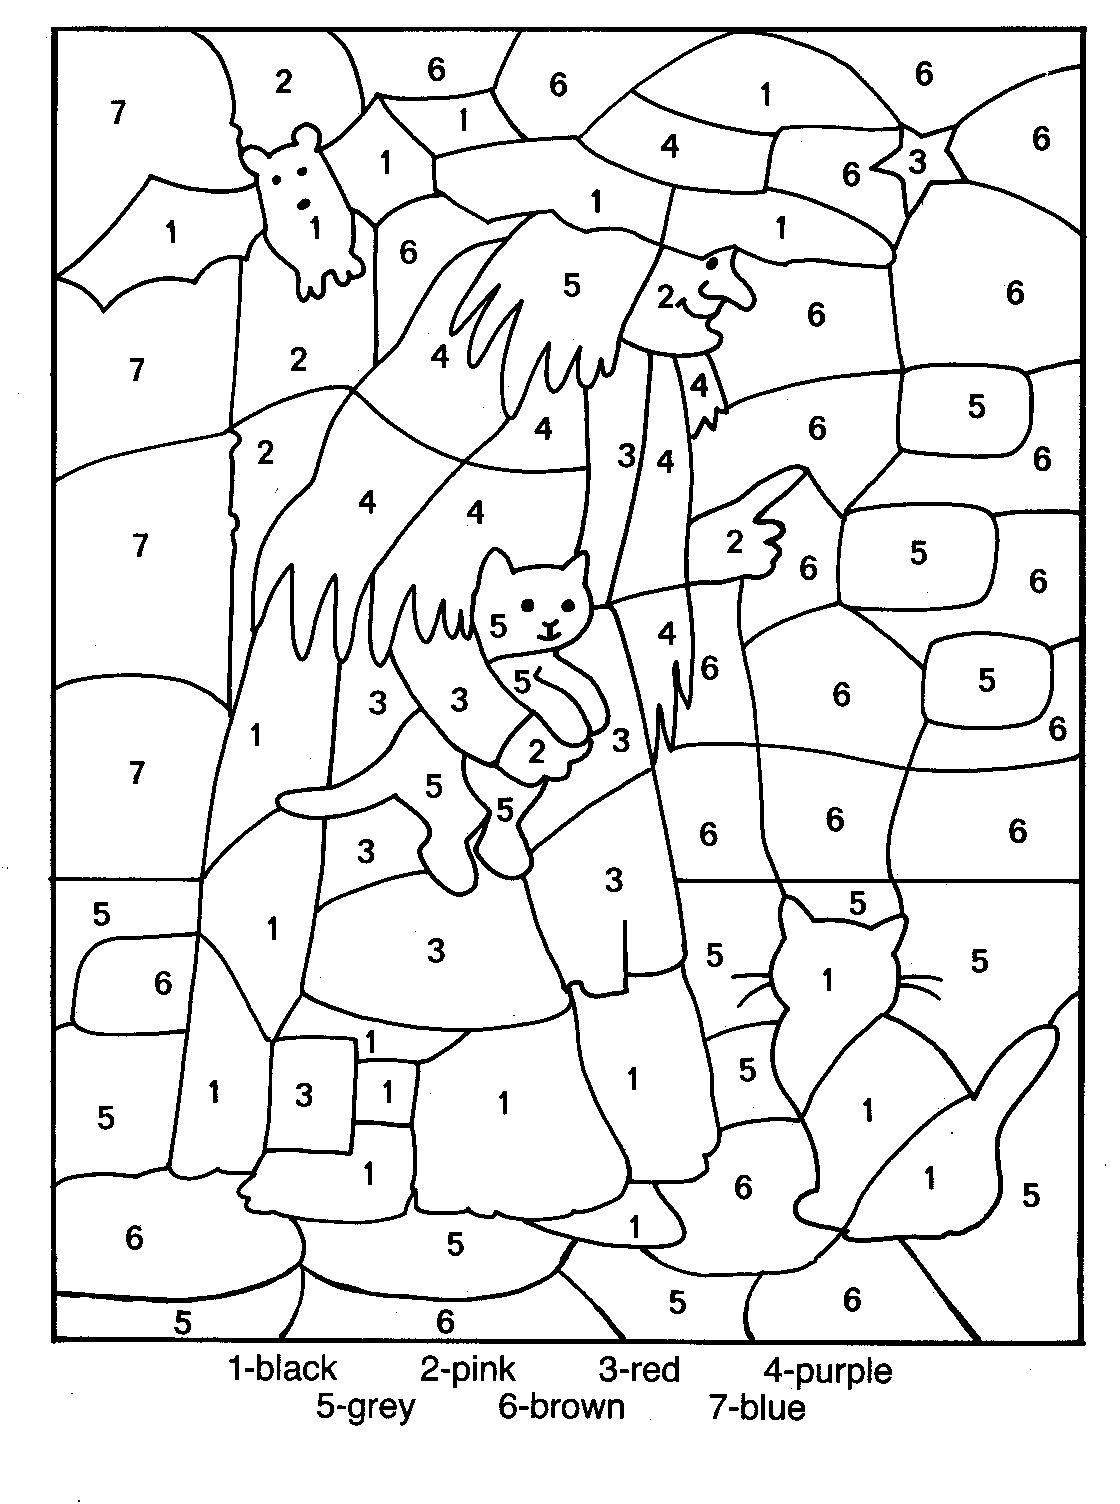 Download Free Printable Color by Number Coloring Pages - Best Coloring Pages For Kids